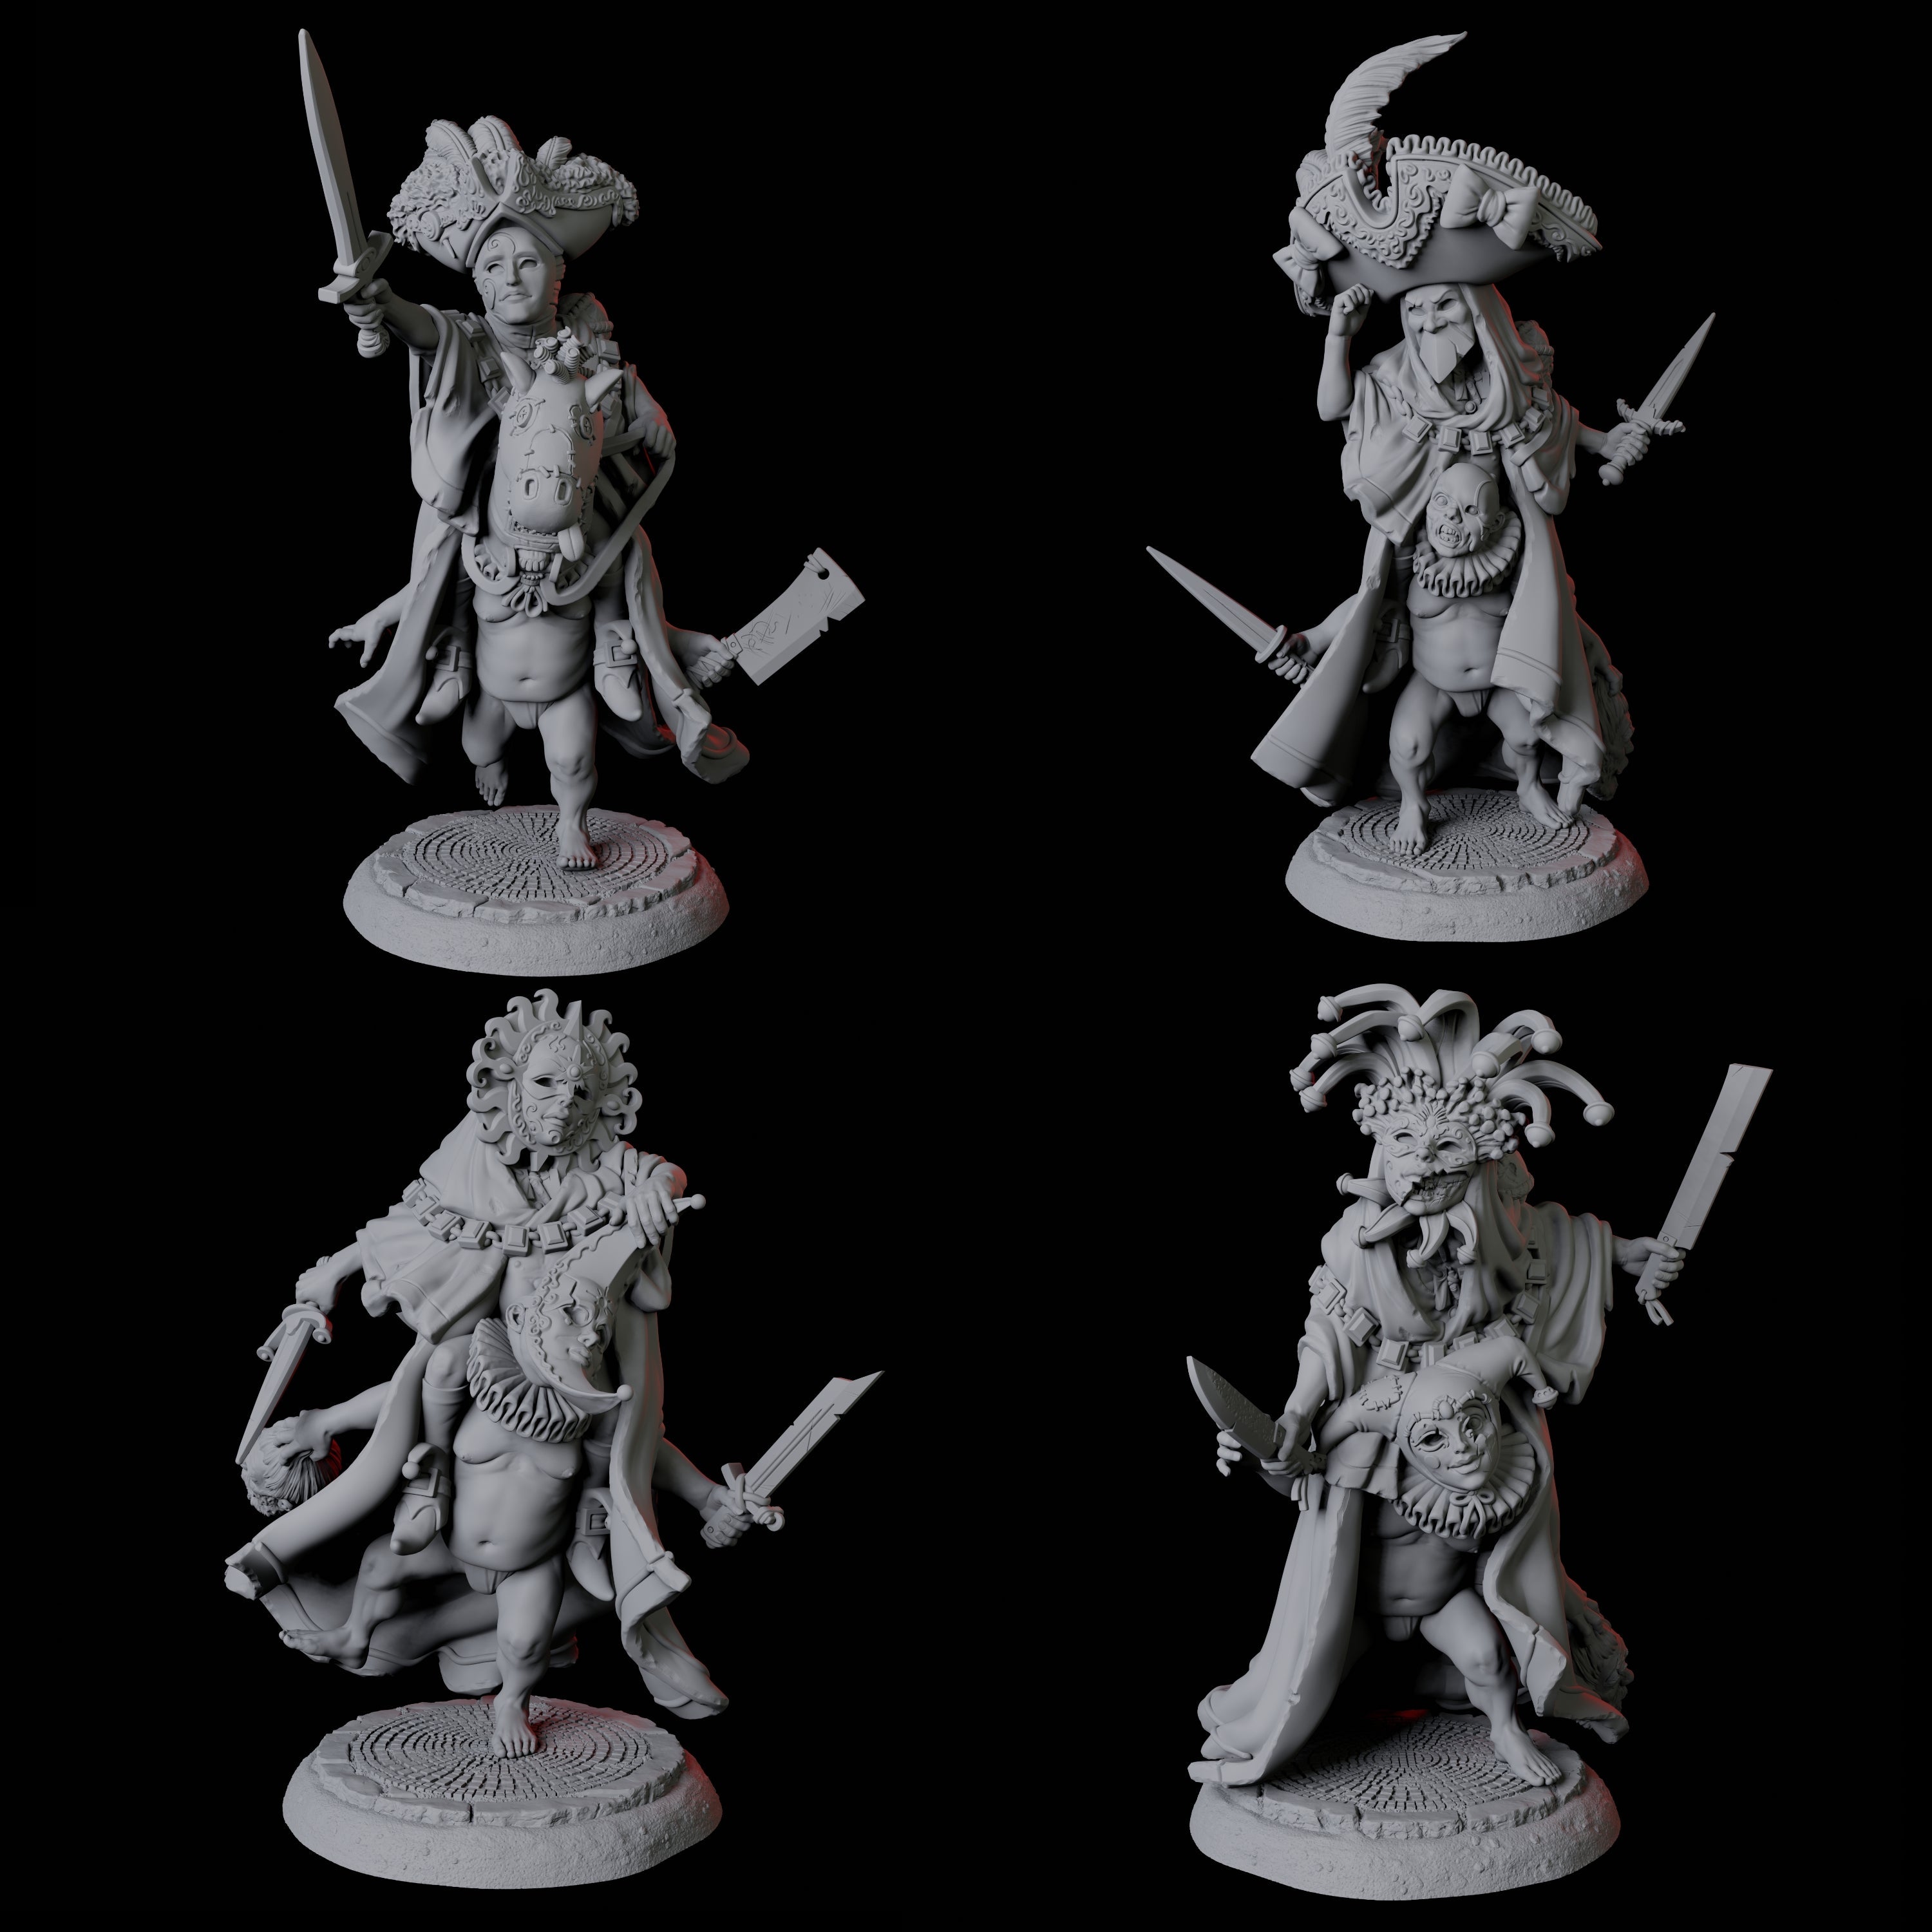 Four Weird Halfling Jester Pairs Miniature for Dungeons and Dragons, Pathfinder or other TTRPGs